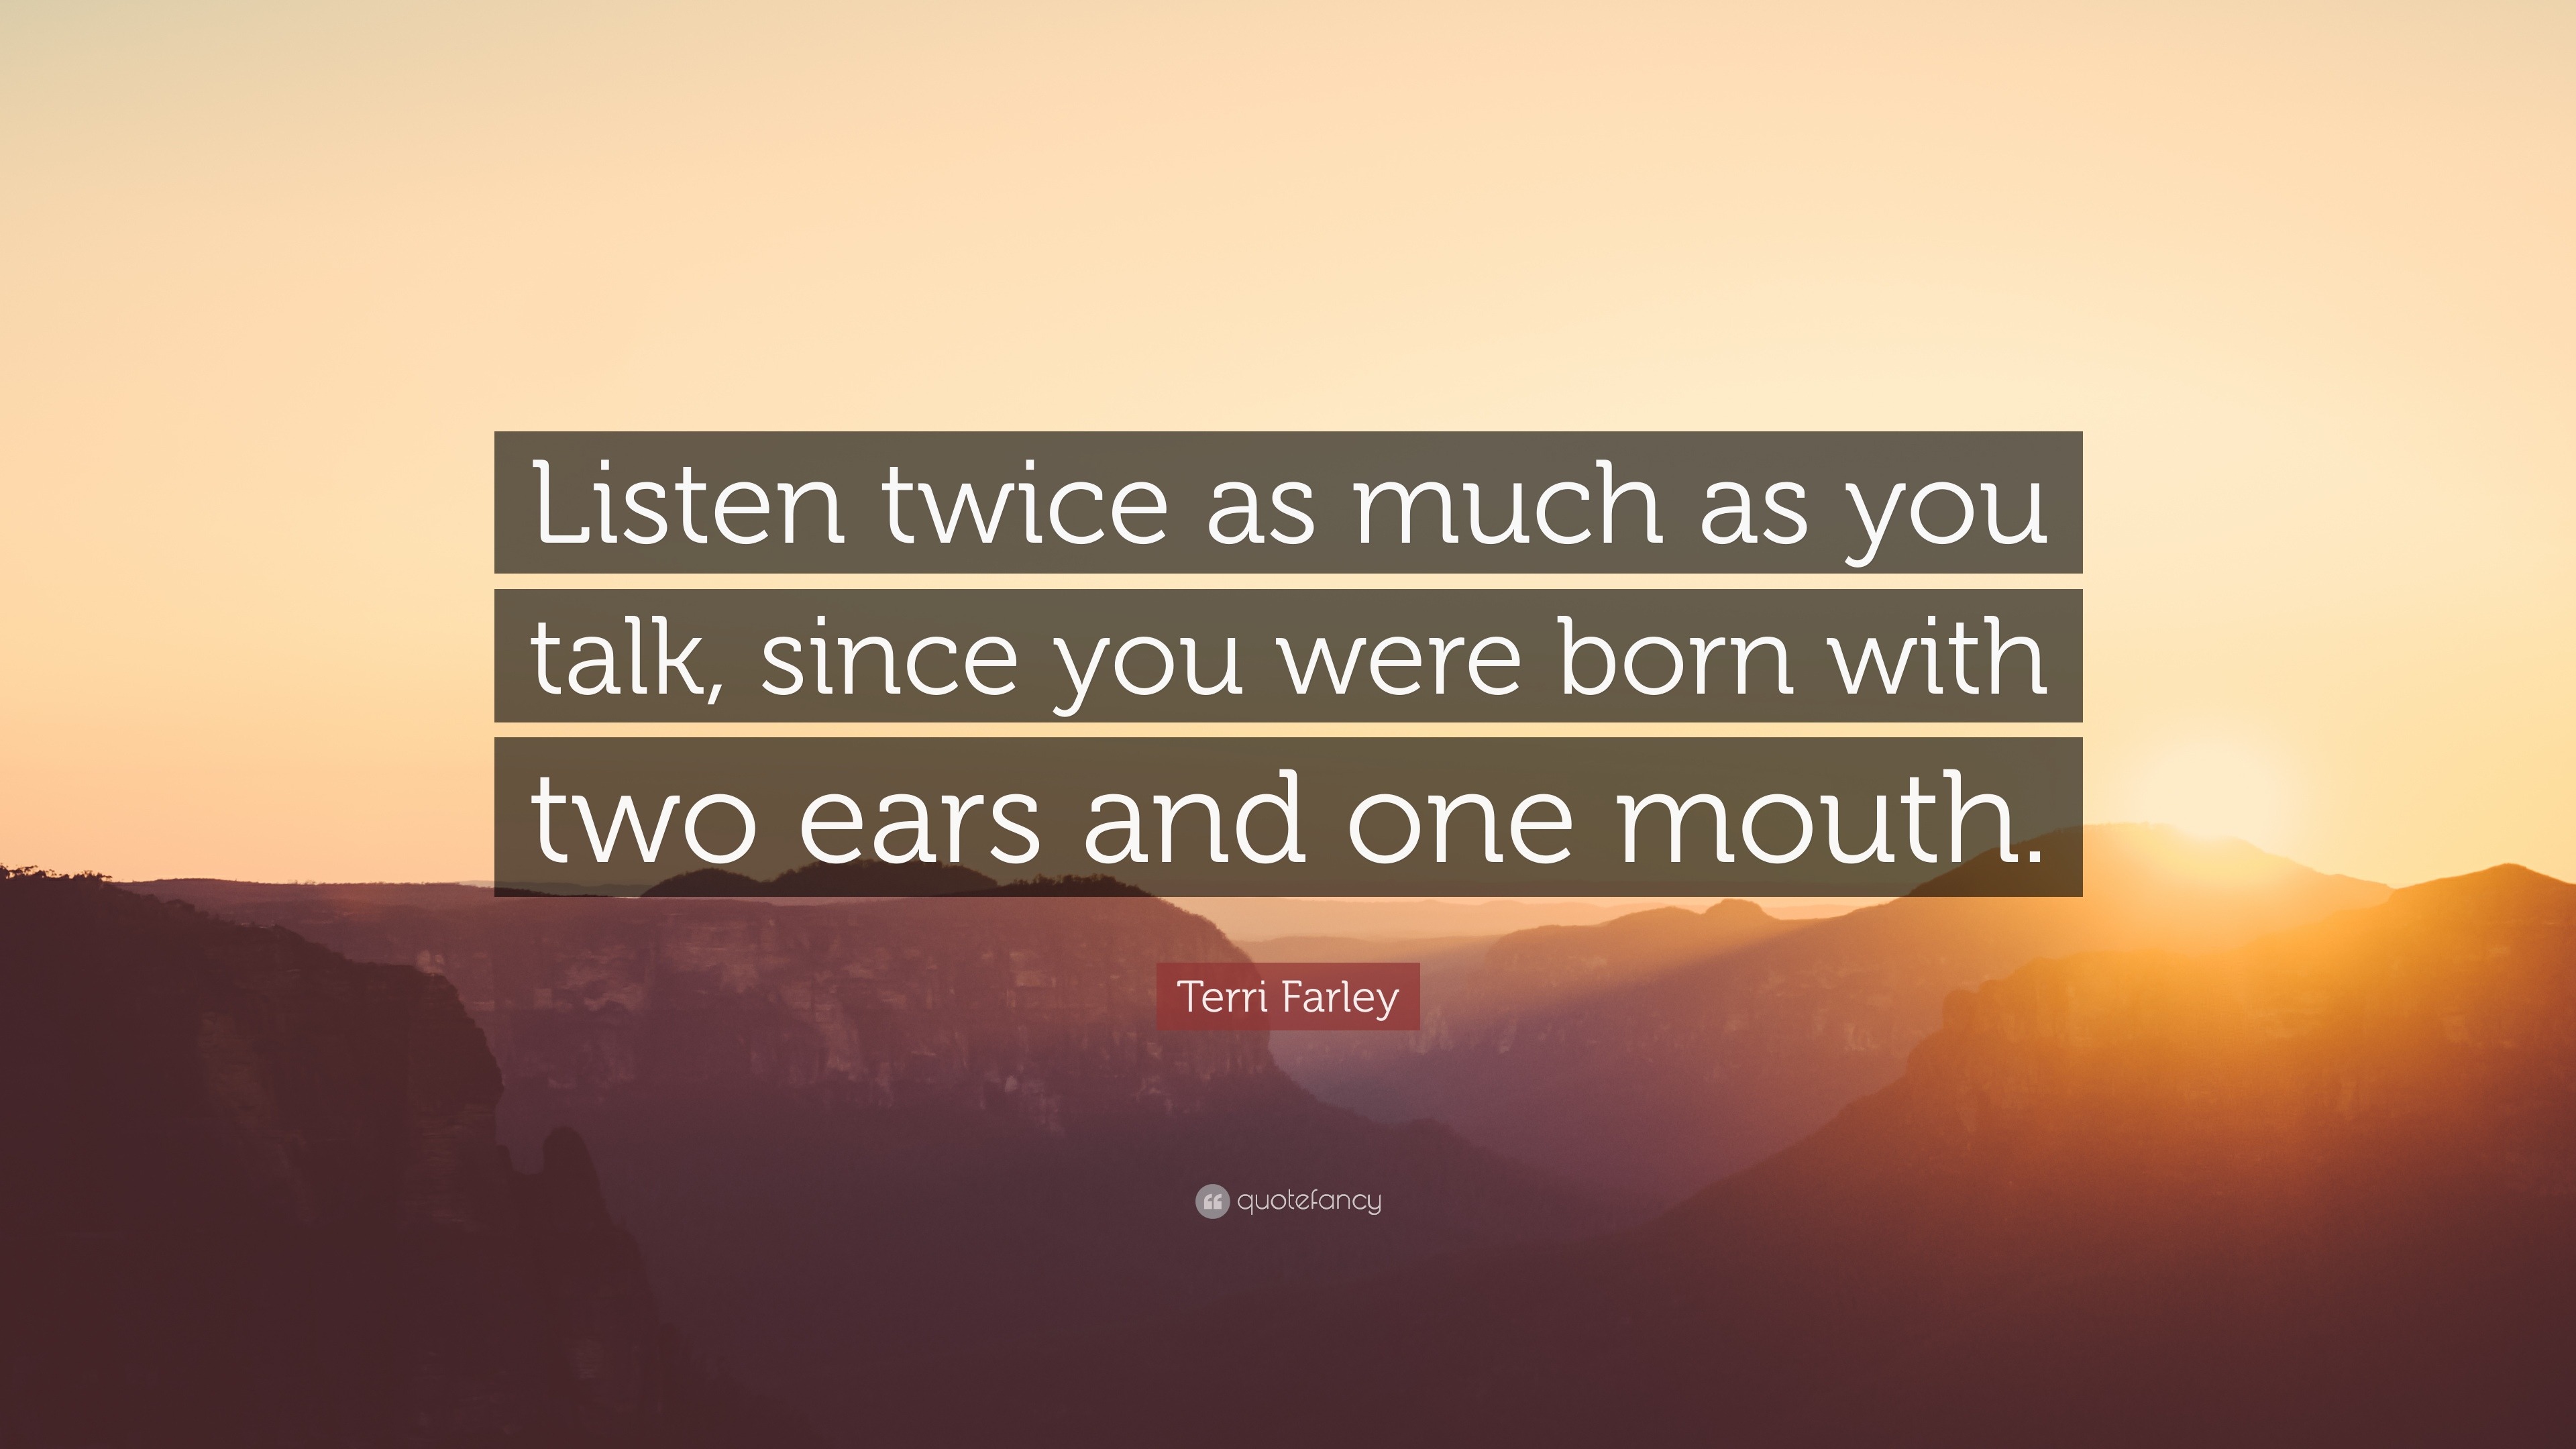 Terri Farley Quote: “Listen twice as much as you talk, since you were ...